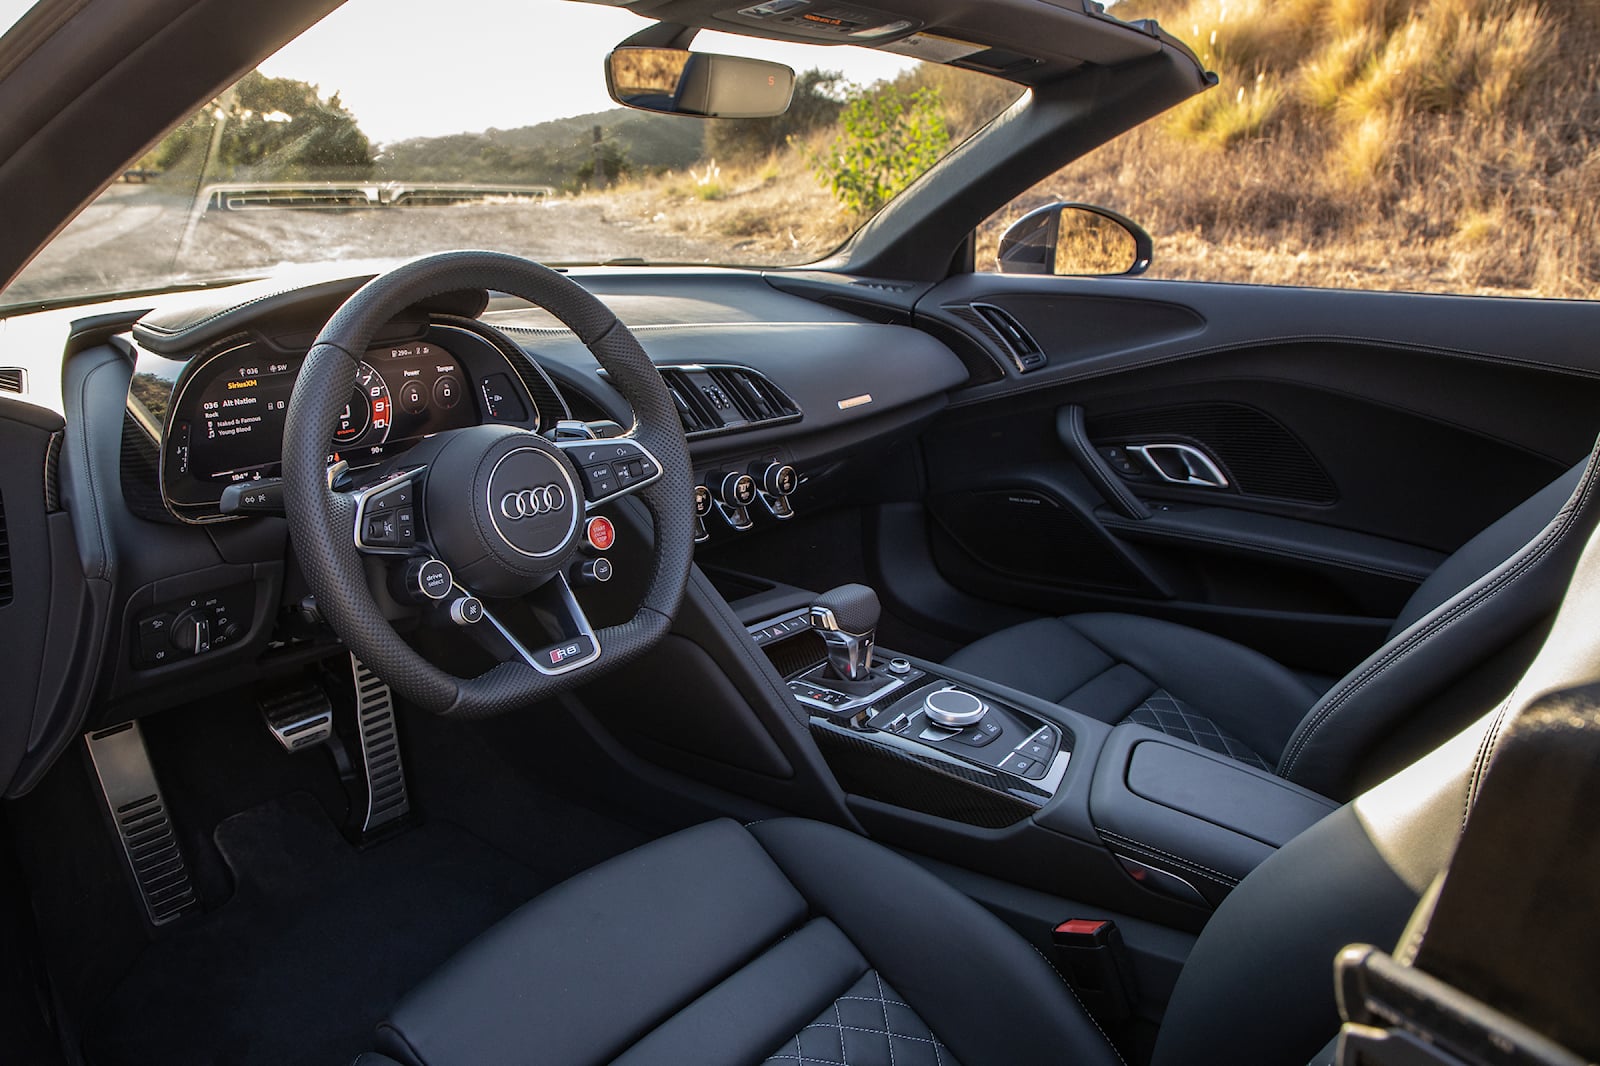 2018 Audi R8 Interior Review  Seating Infotainment Dashboard and  Features  CarIndigocom